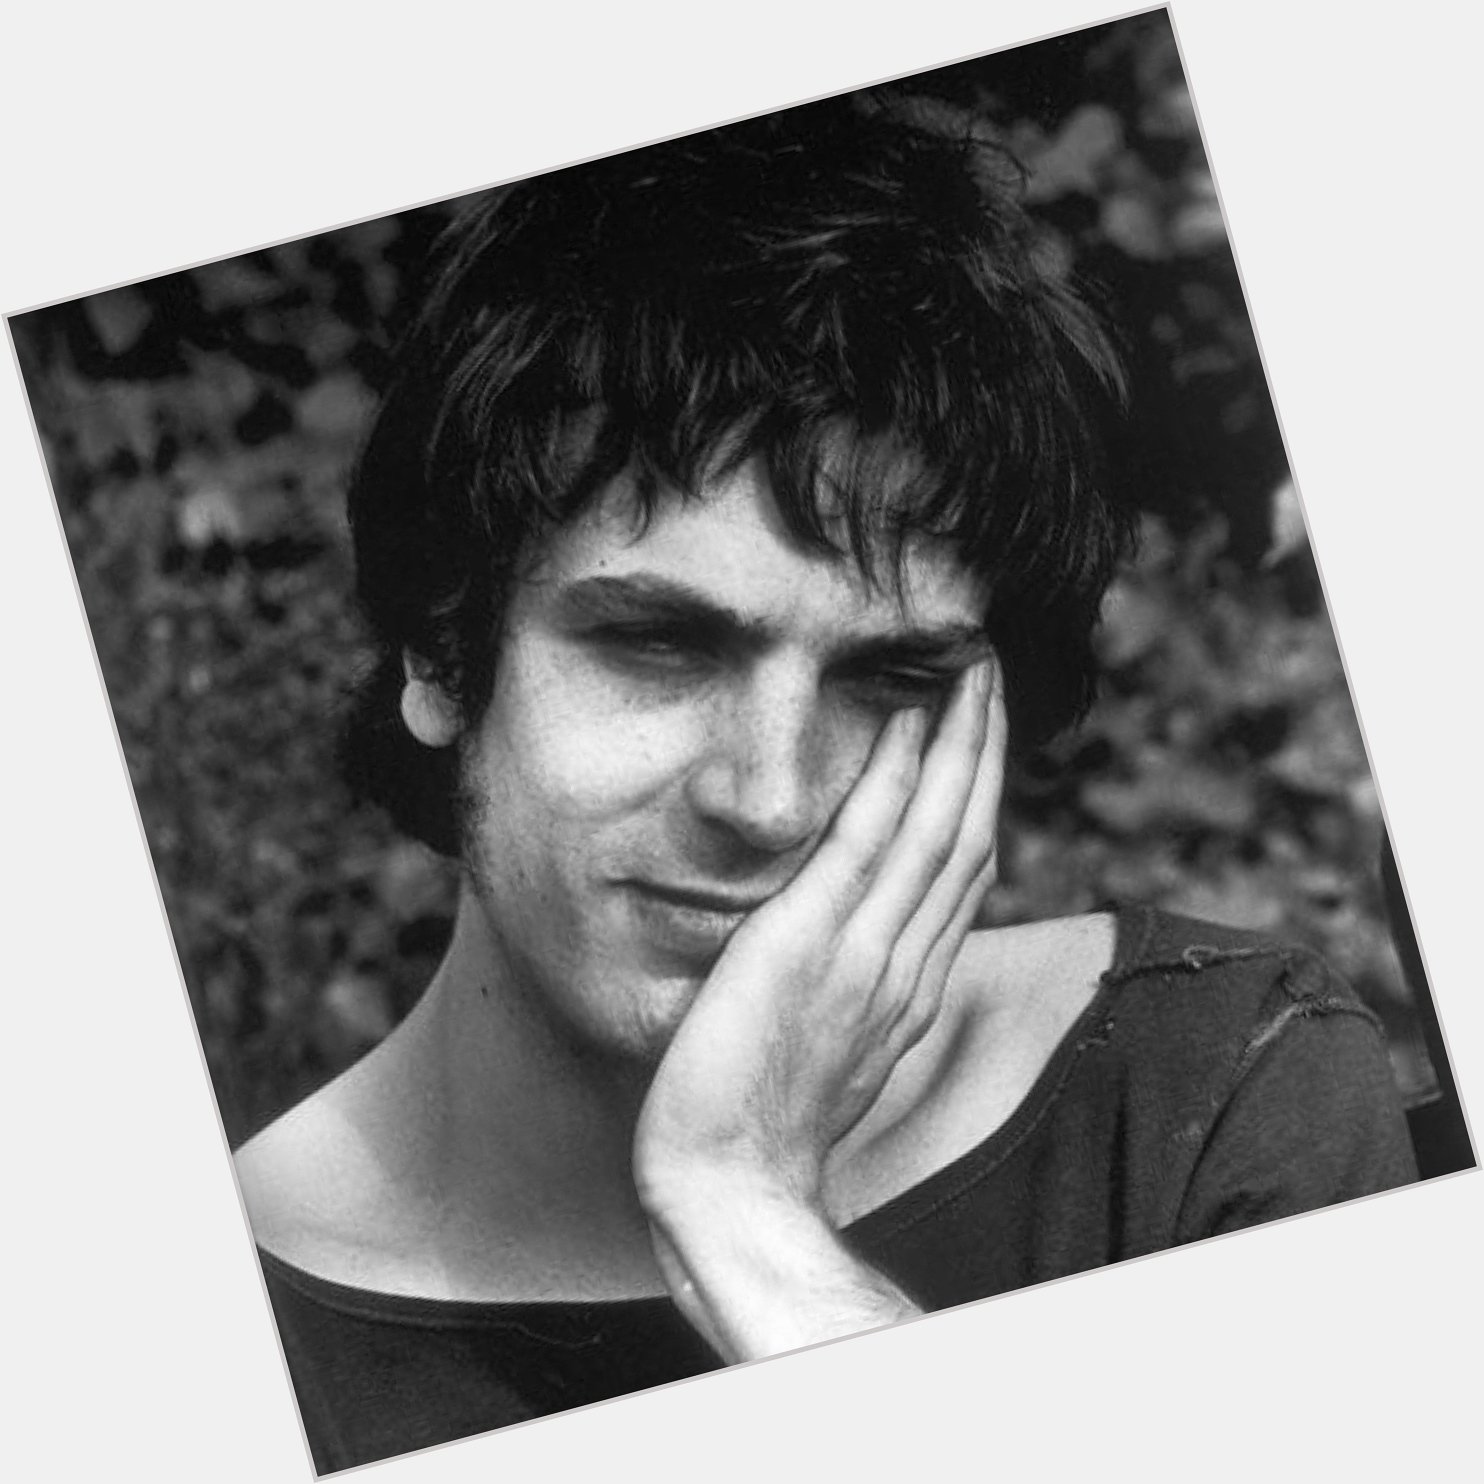 Happy birthday to the legend himself syd barrett!! wherever he is rn he is shining on! 